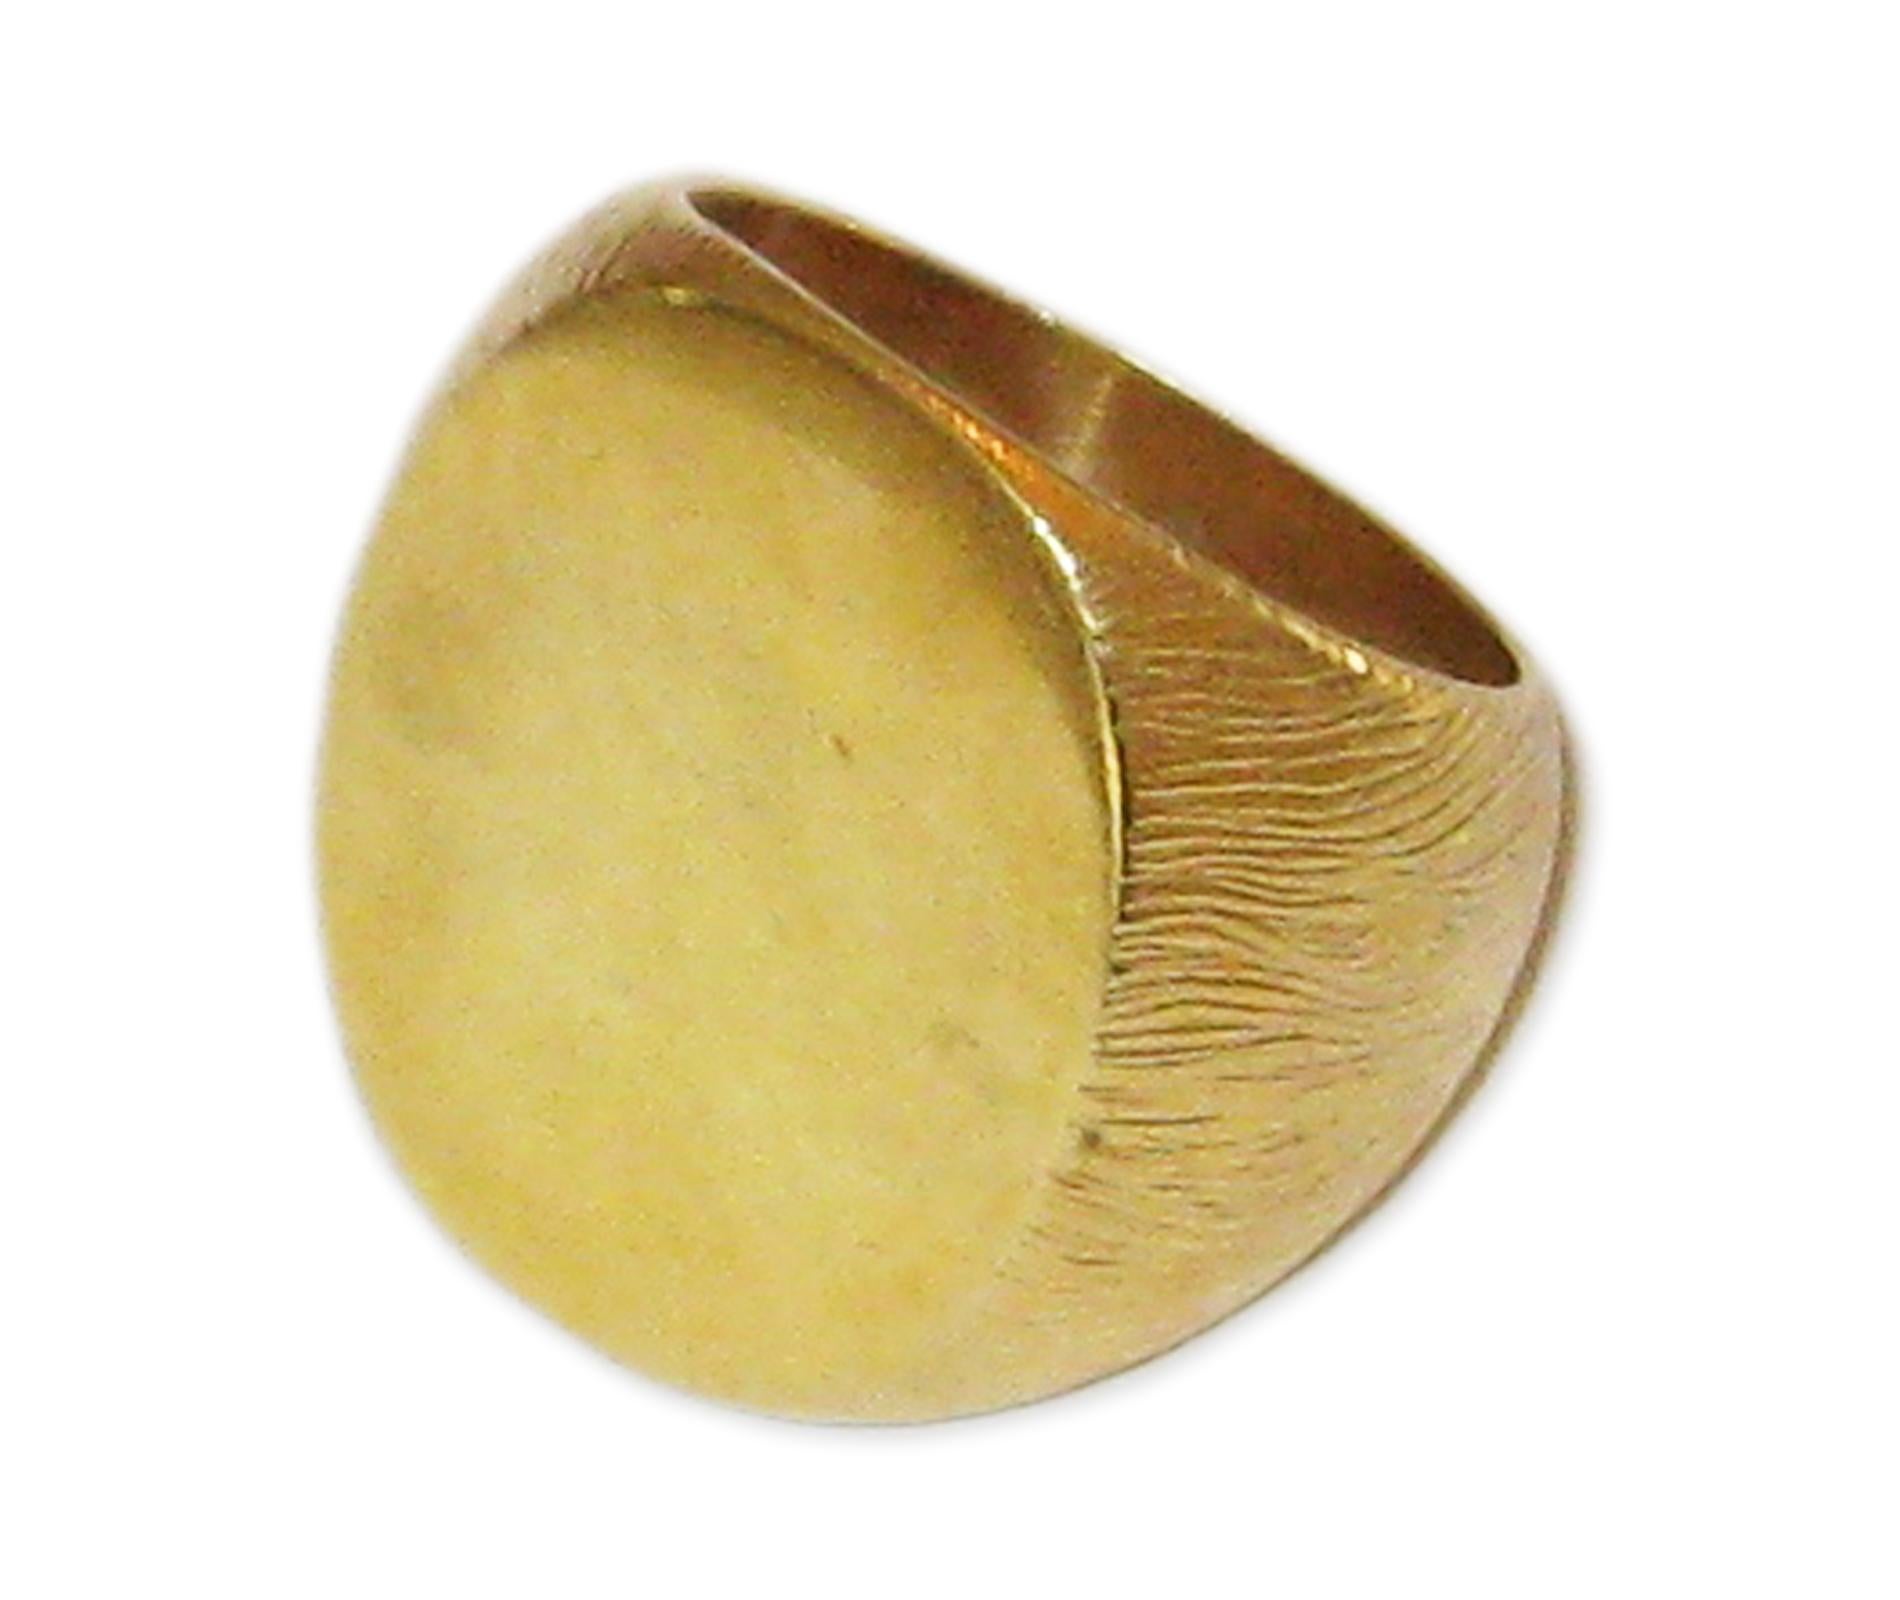 Twig Signet Ring in 18k Gold In New Condition For Sale In Solana Beach, CA